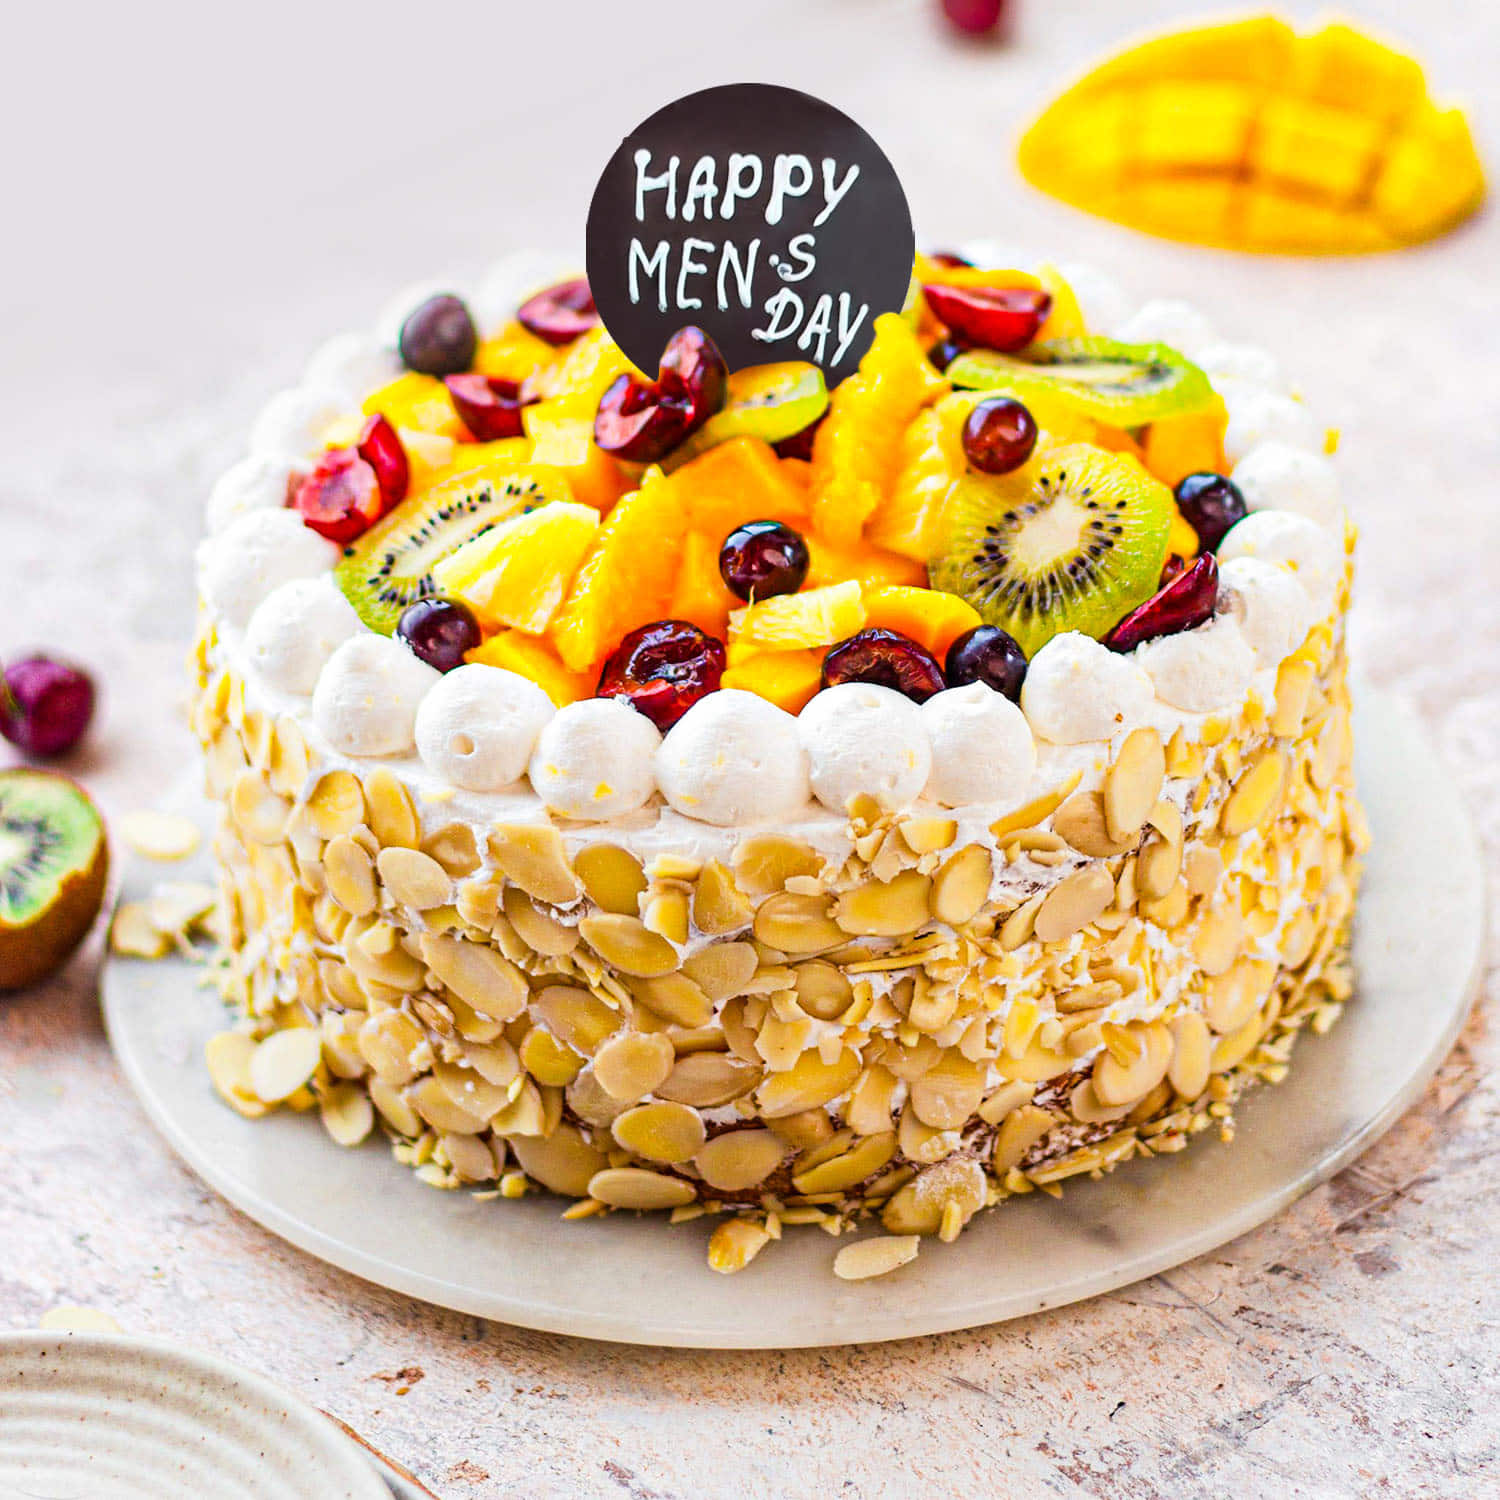 Free Photo | Little creamy cake with sliced fruits on it on white-light  desk, fruit cake sweet biscuit cookie taste